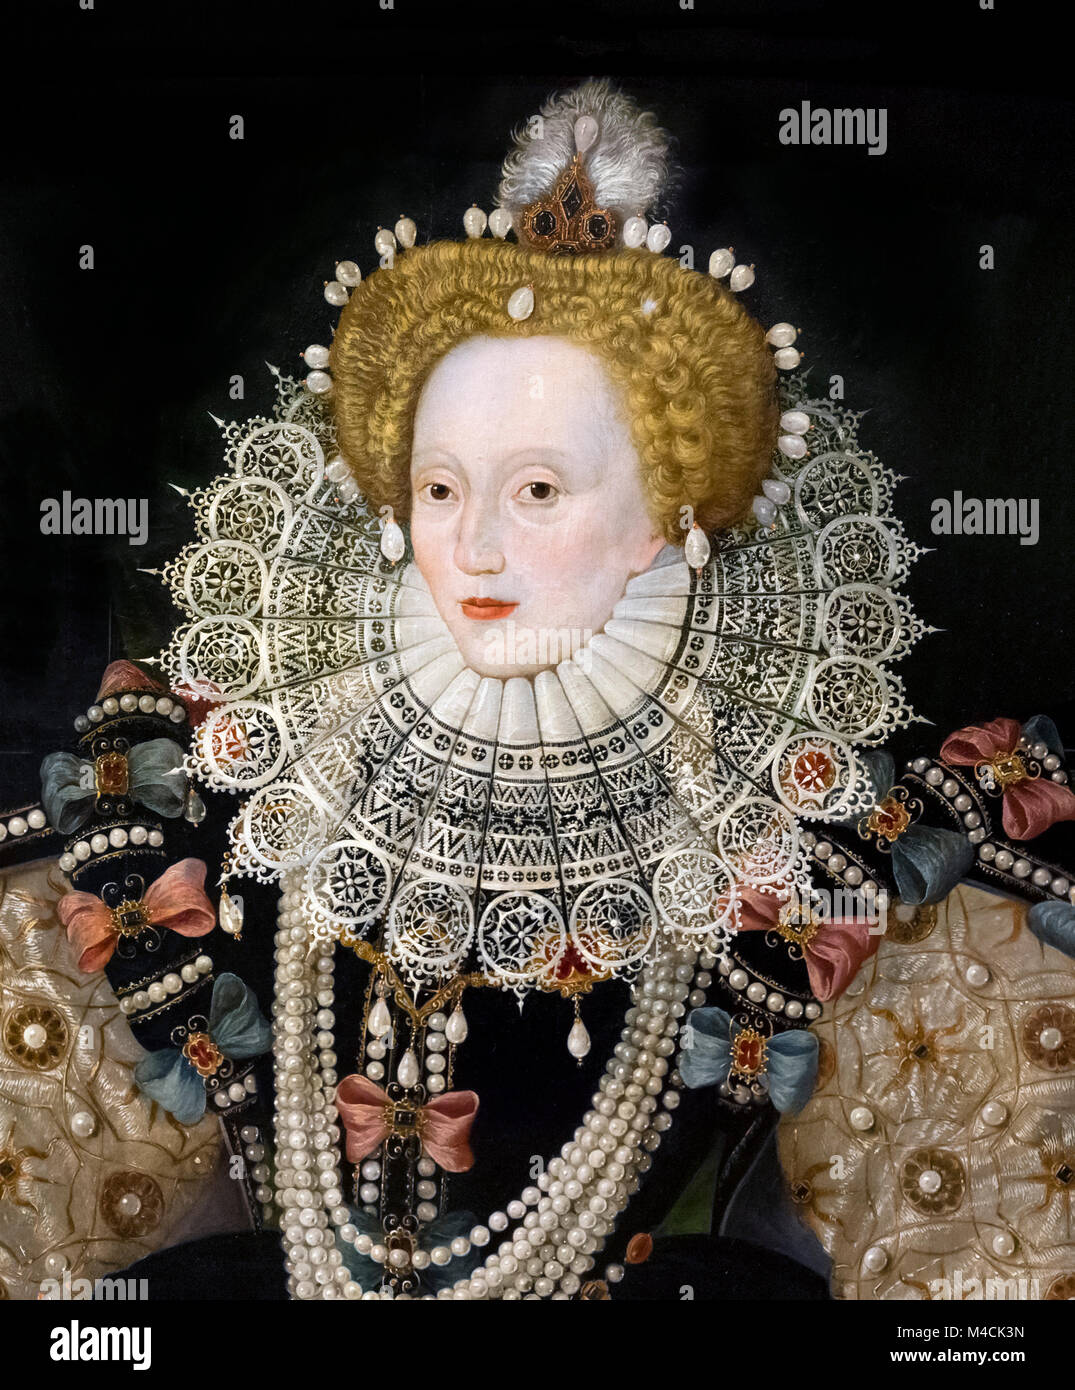 Elizabeth I, the 'Armada Portrait'. Portrait of Queen Elizabeth I by an unknown artist of the English school, oil on panel, c.1588. Detail from a larger painting, M4CK3P. Stock Photo